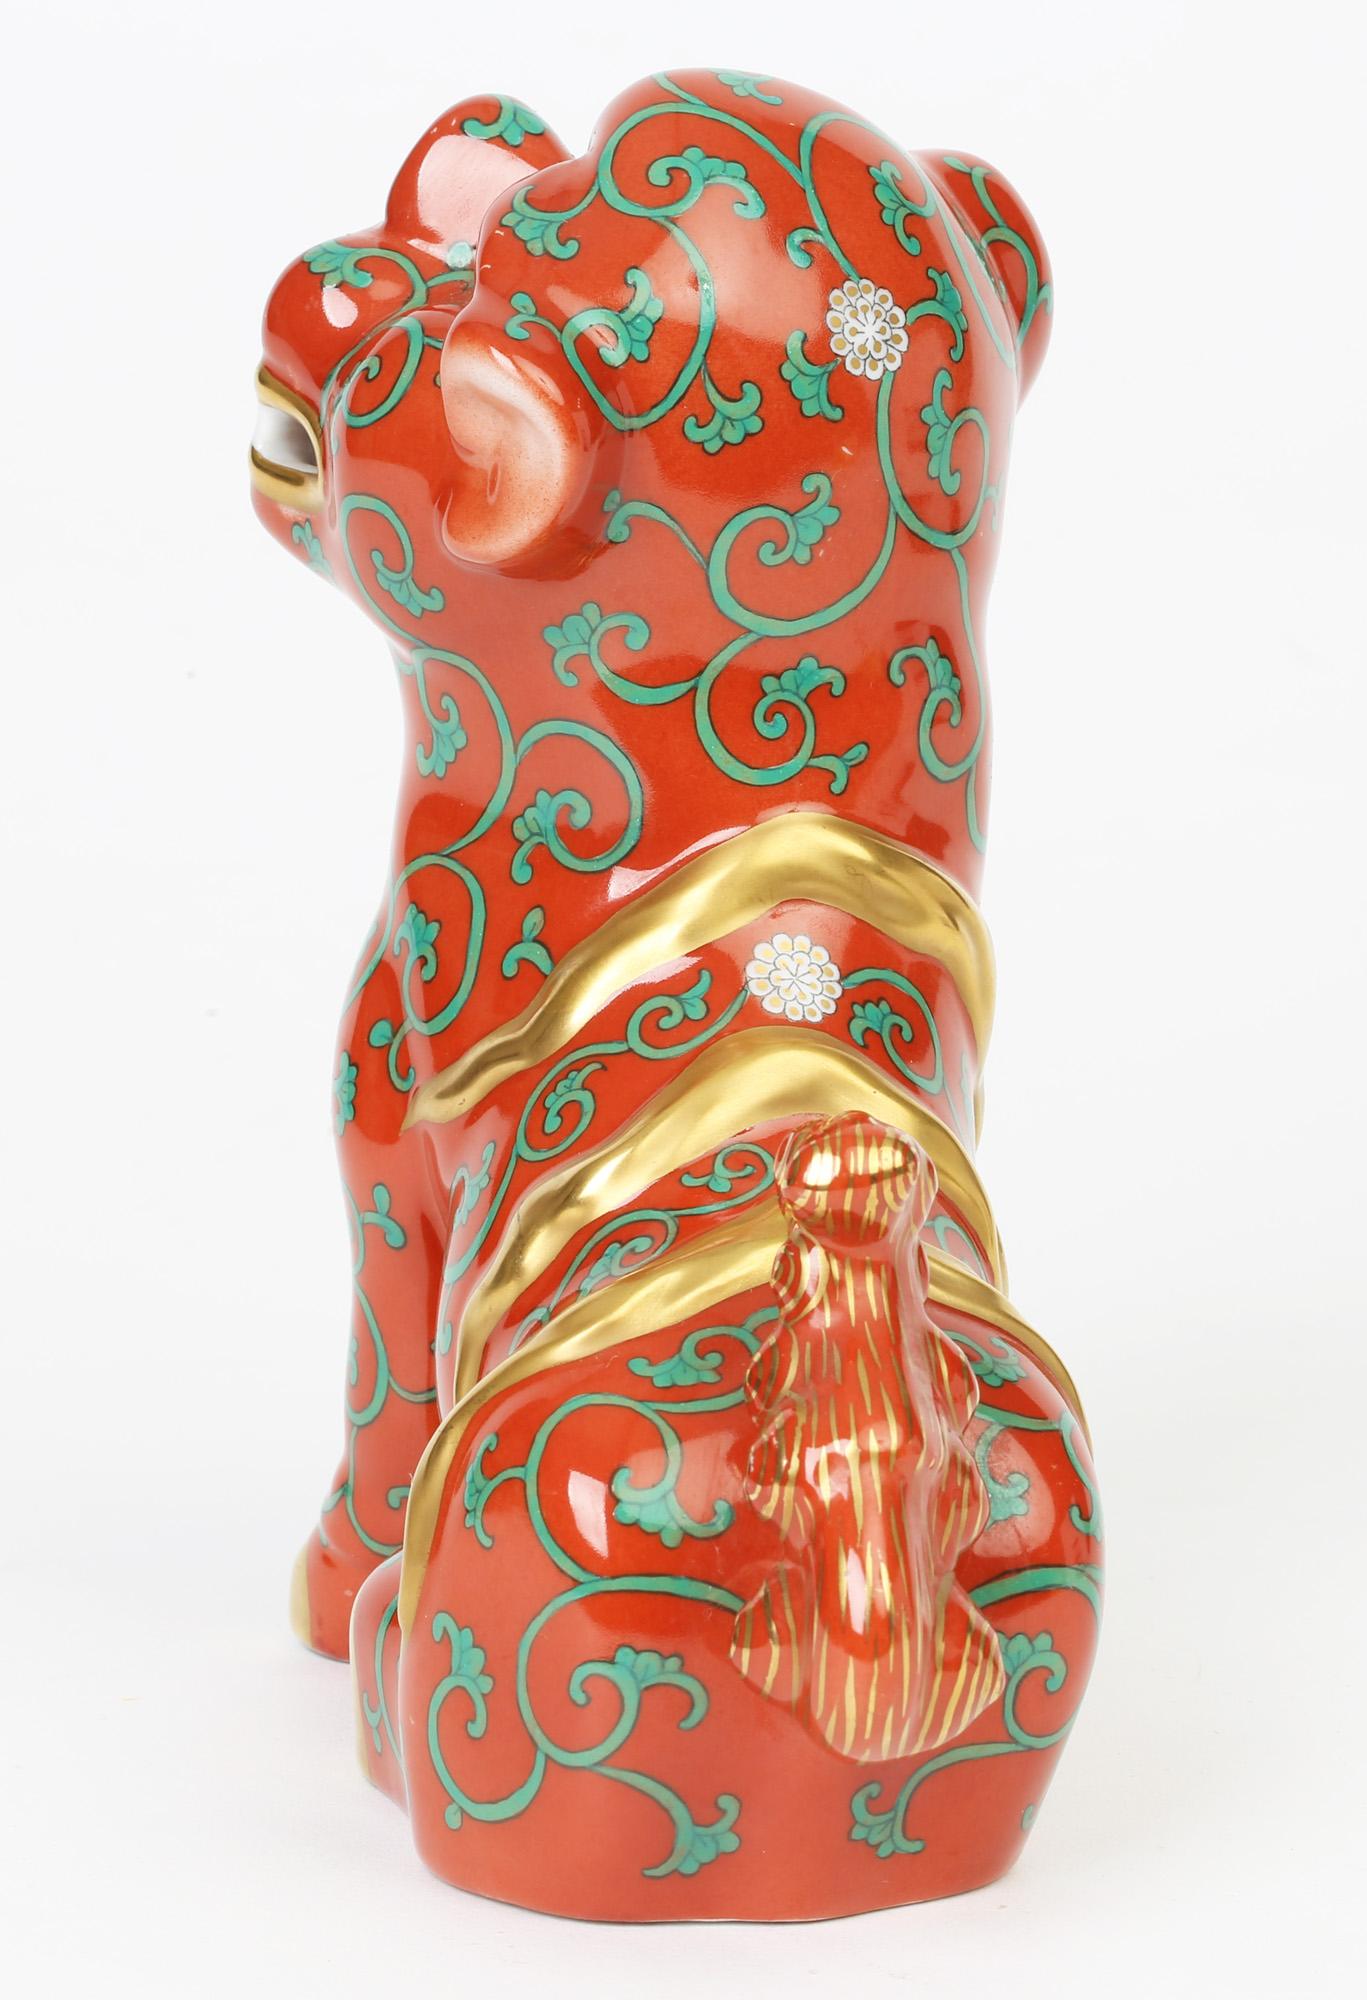 A stylish Hungarian porcelain Oriental Foo Dog figure painted in Special Godollo Red and made by Herend, circa 1950. The figure stands facing right with one front paw raised and is painted with a scroll and floral pattern on rich brick red colour